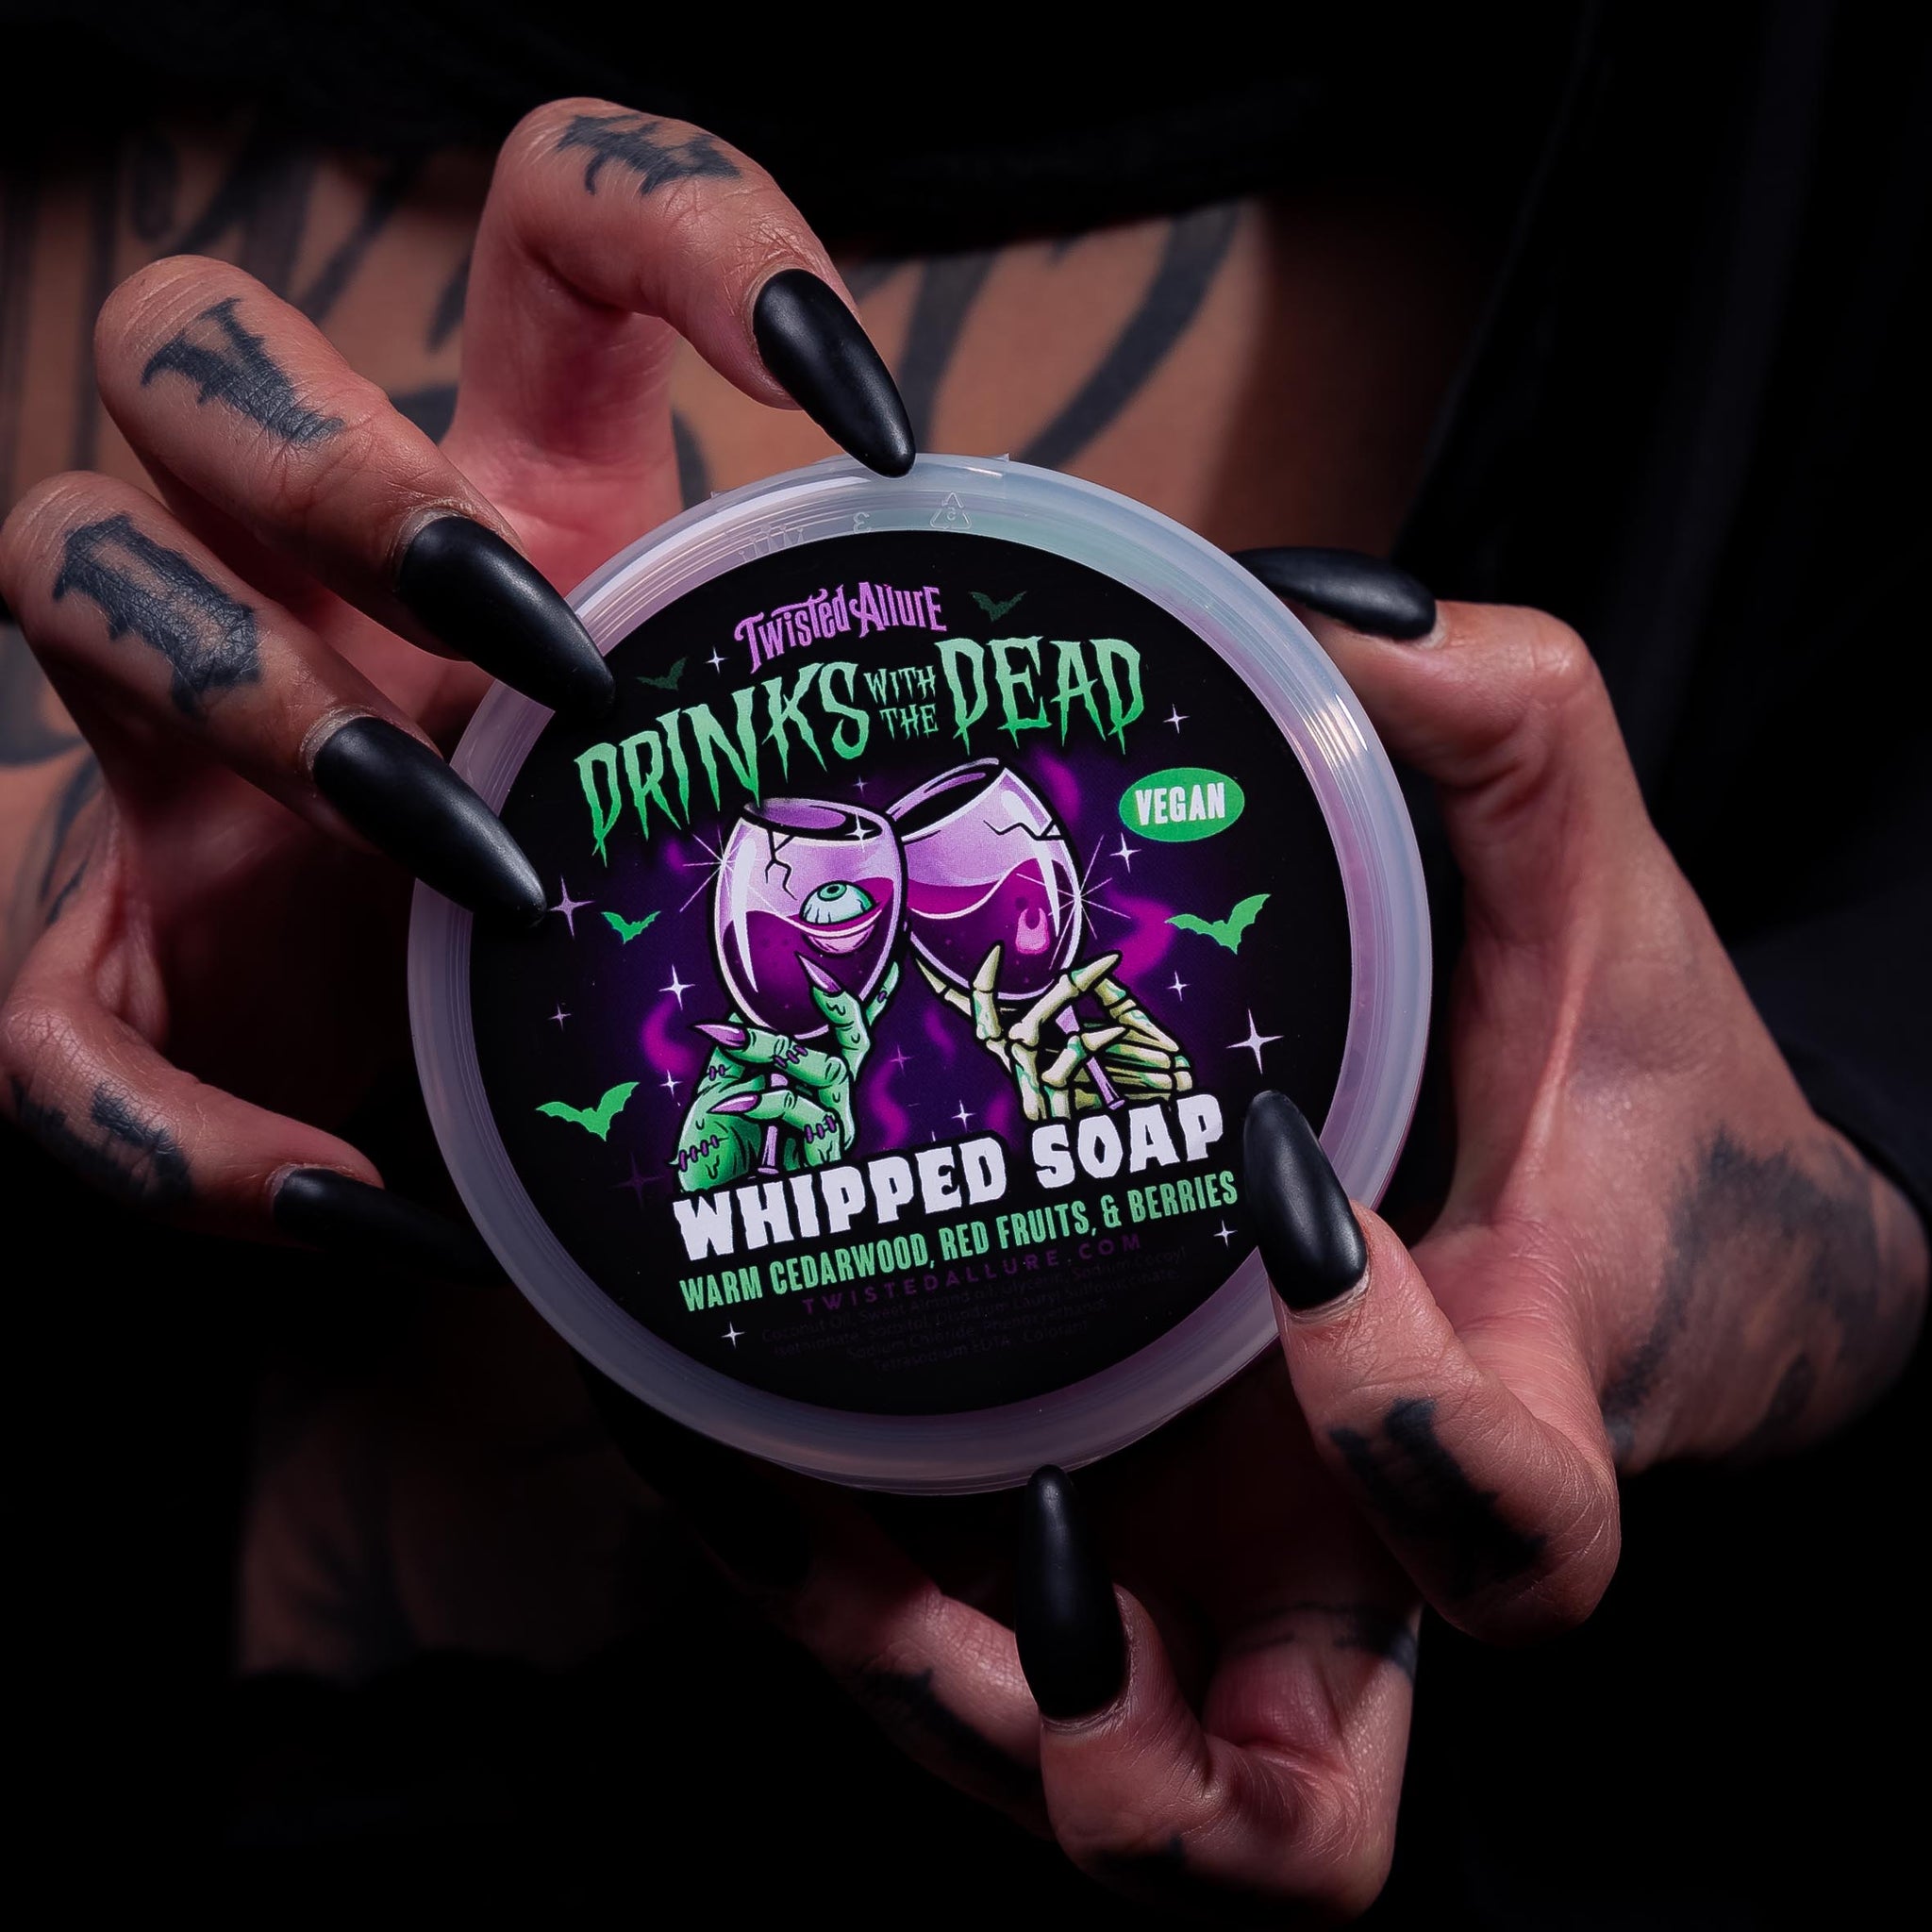 Drinks with the Dead Whipped Soap (Cedarwood, red fruits & berries)